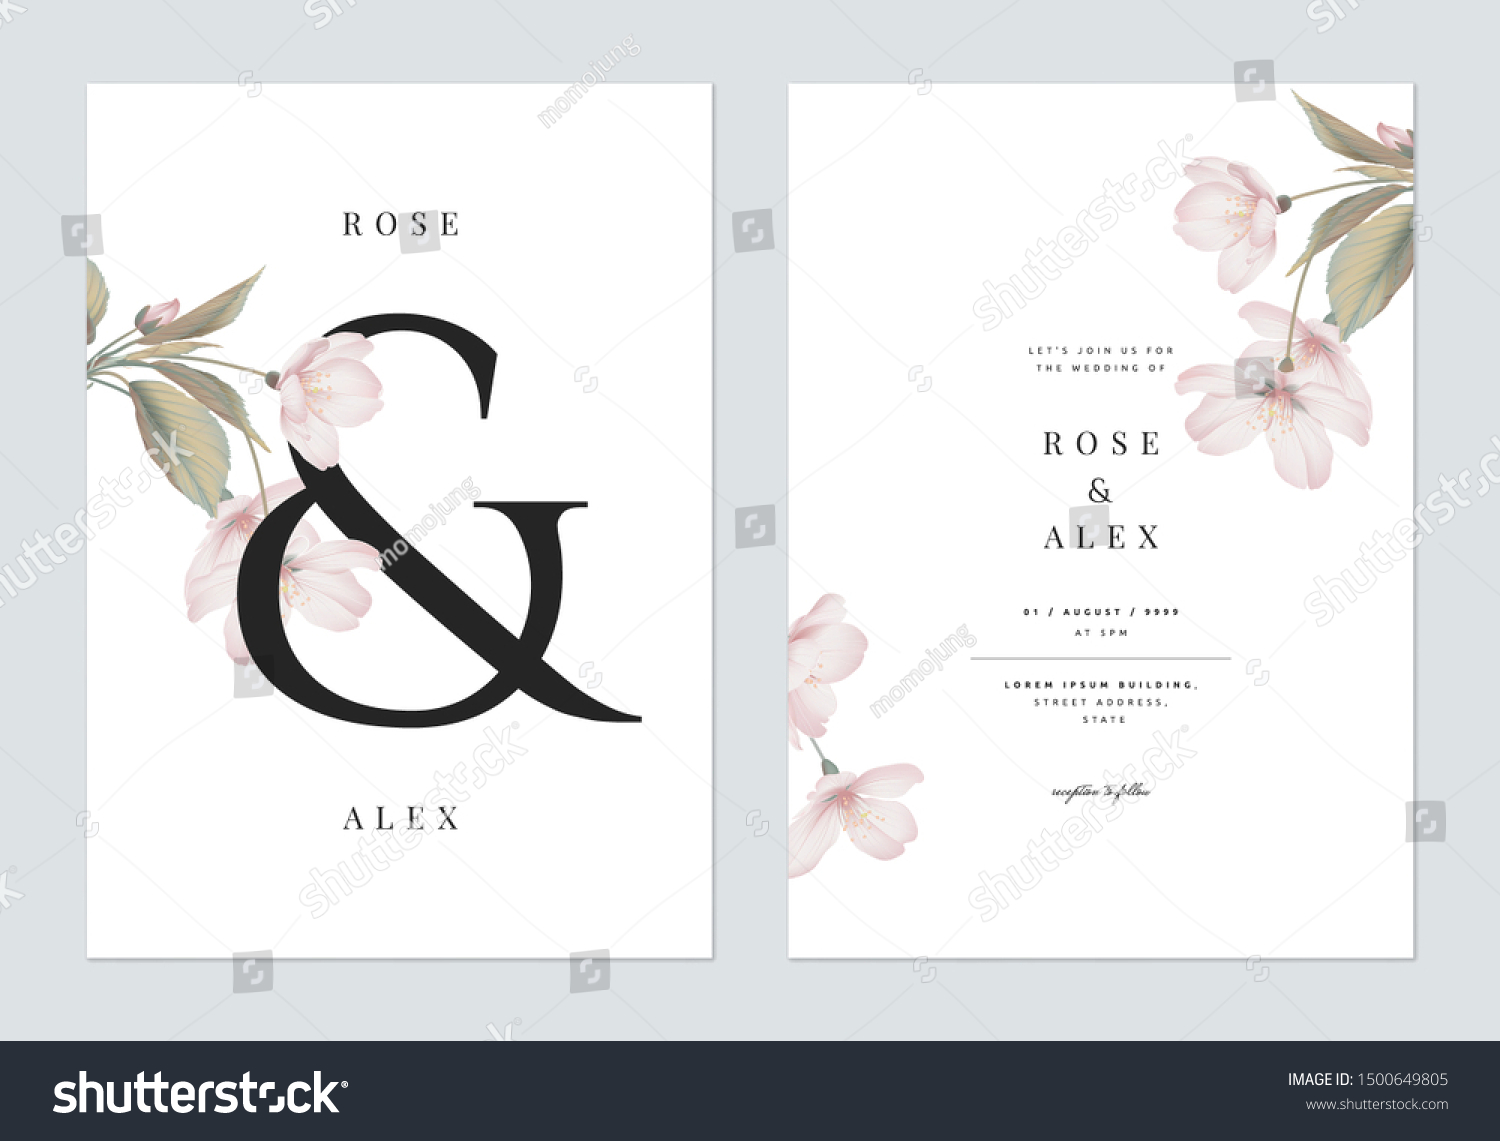 Floral wedding invitation card template design, Somei Yoshino sakura flowers with leaves with ampersand lettering on white, pastel vintage theme #1500649805